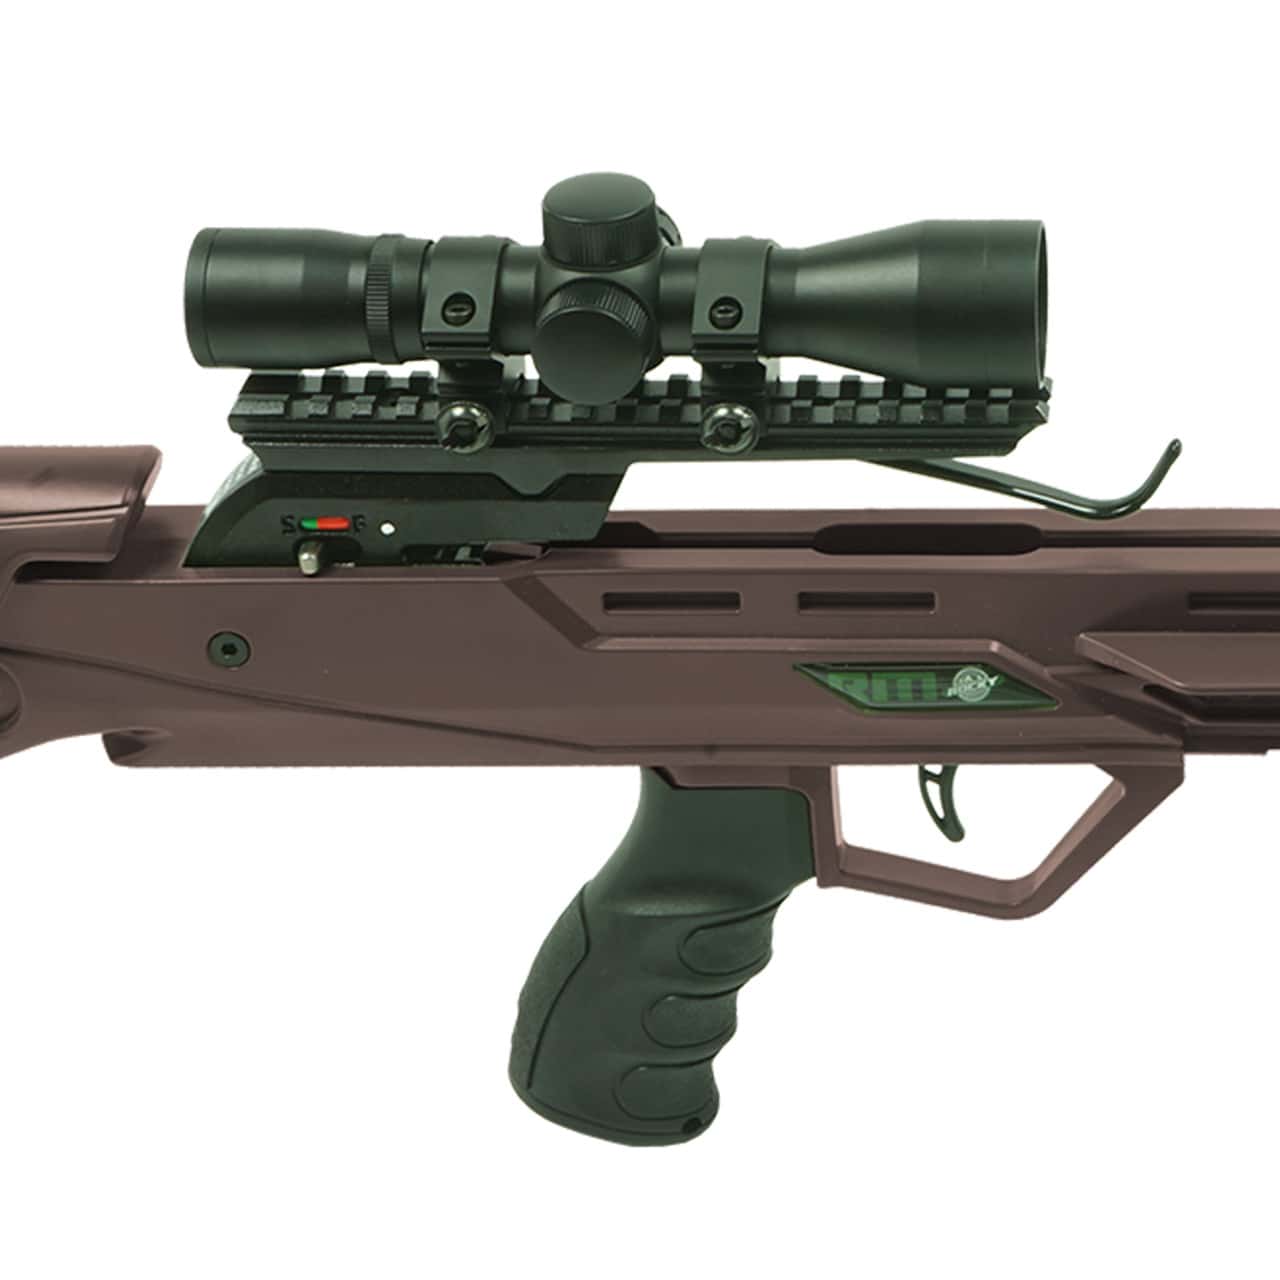 RM415 Scope and Trigger Group